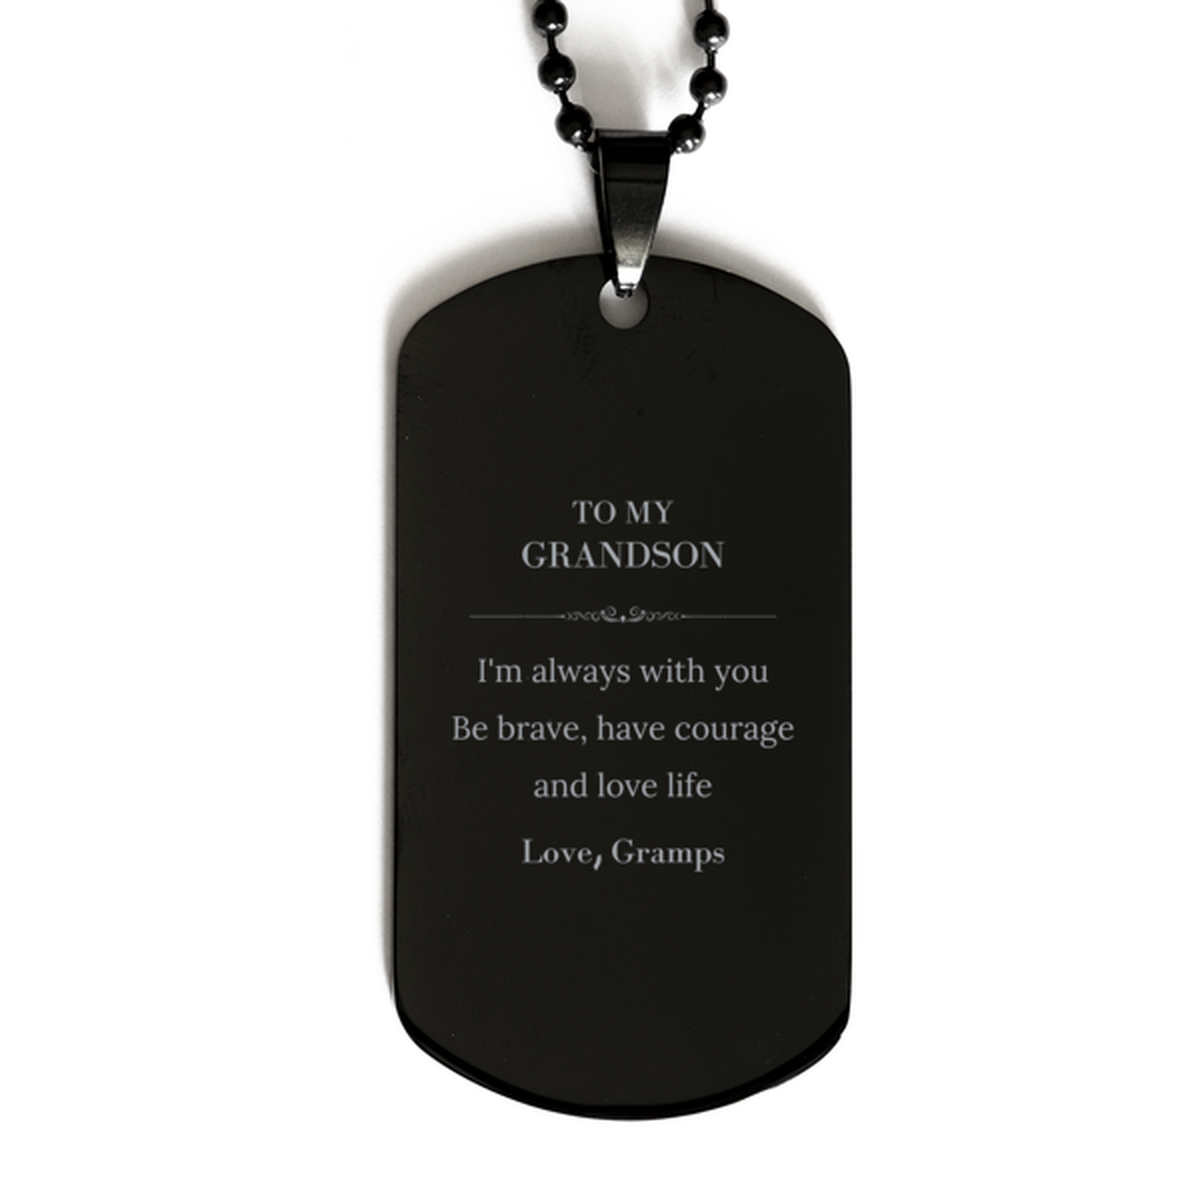 To My Grandson Gifts from Gramps, Unique Black Dog Tag Inspirational Christmas Birthday Graduation Gifts for Grandson I'm always with you. Be brave, have courage and love life. Love, Gramps